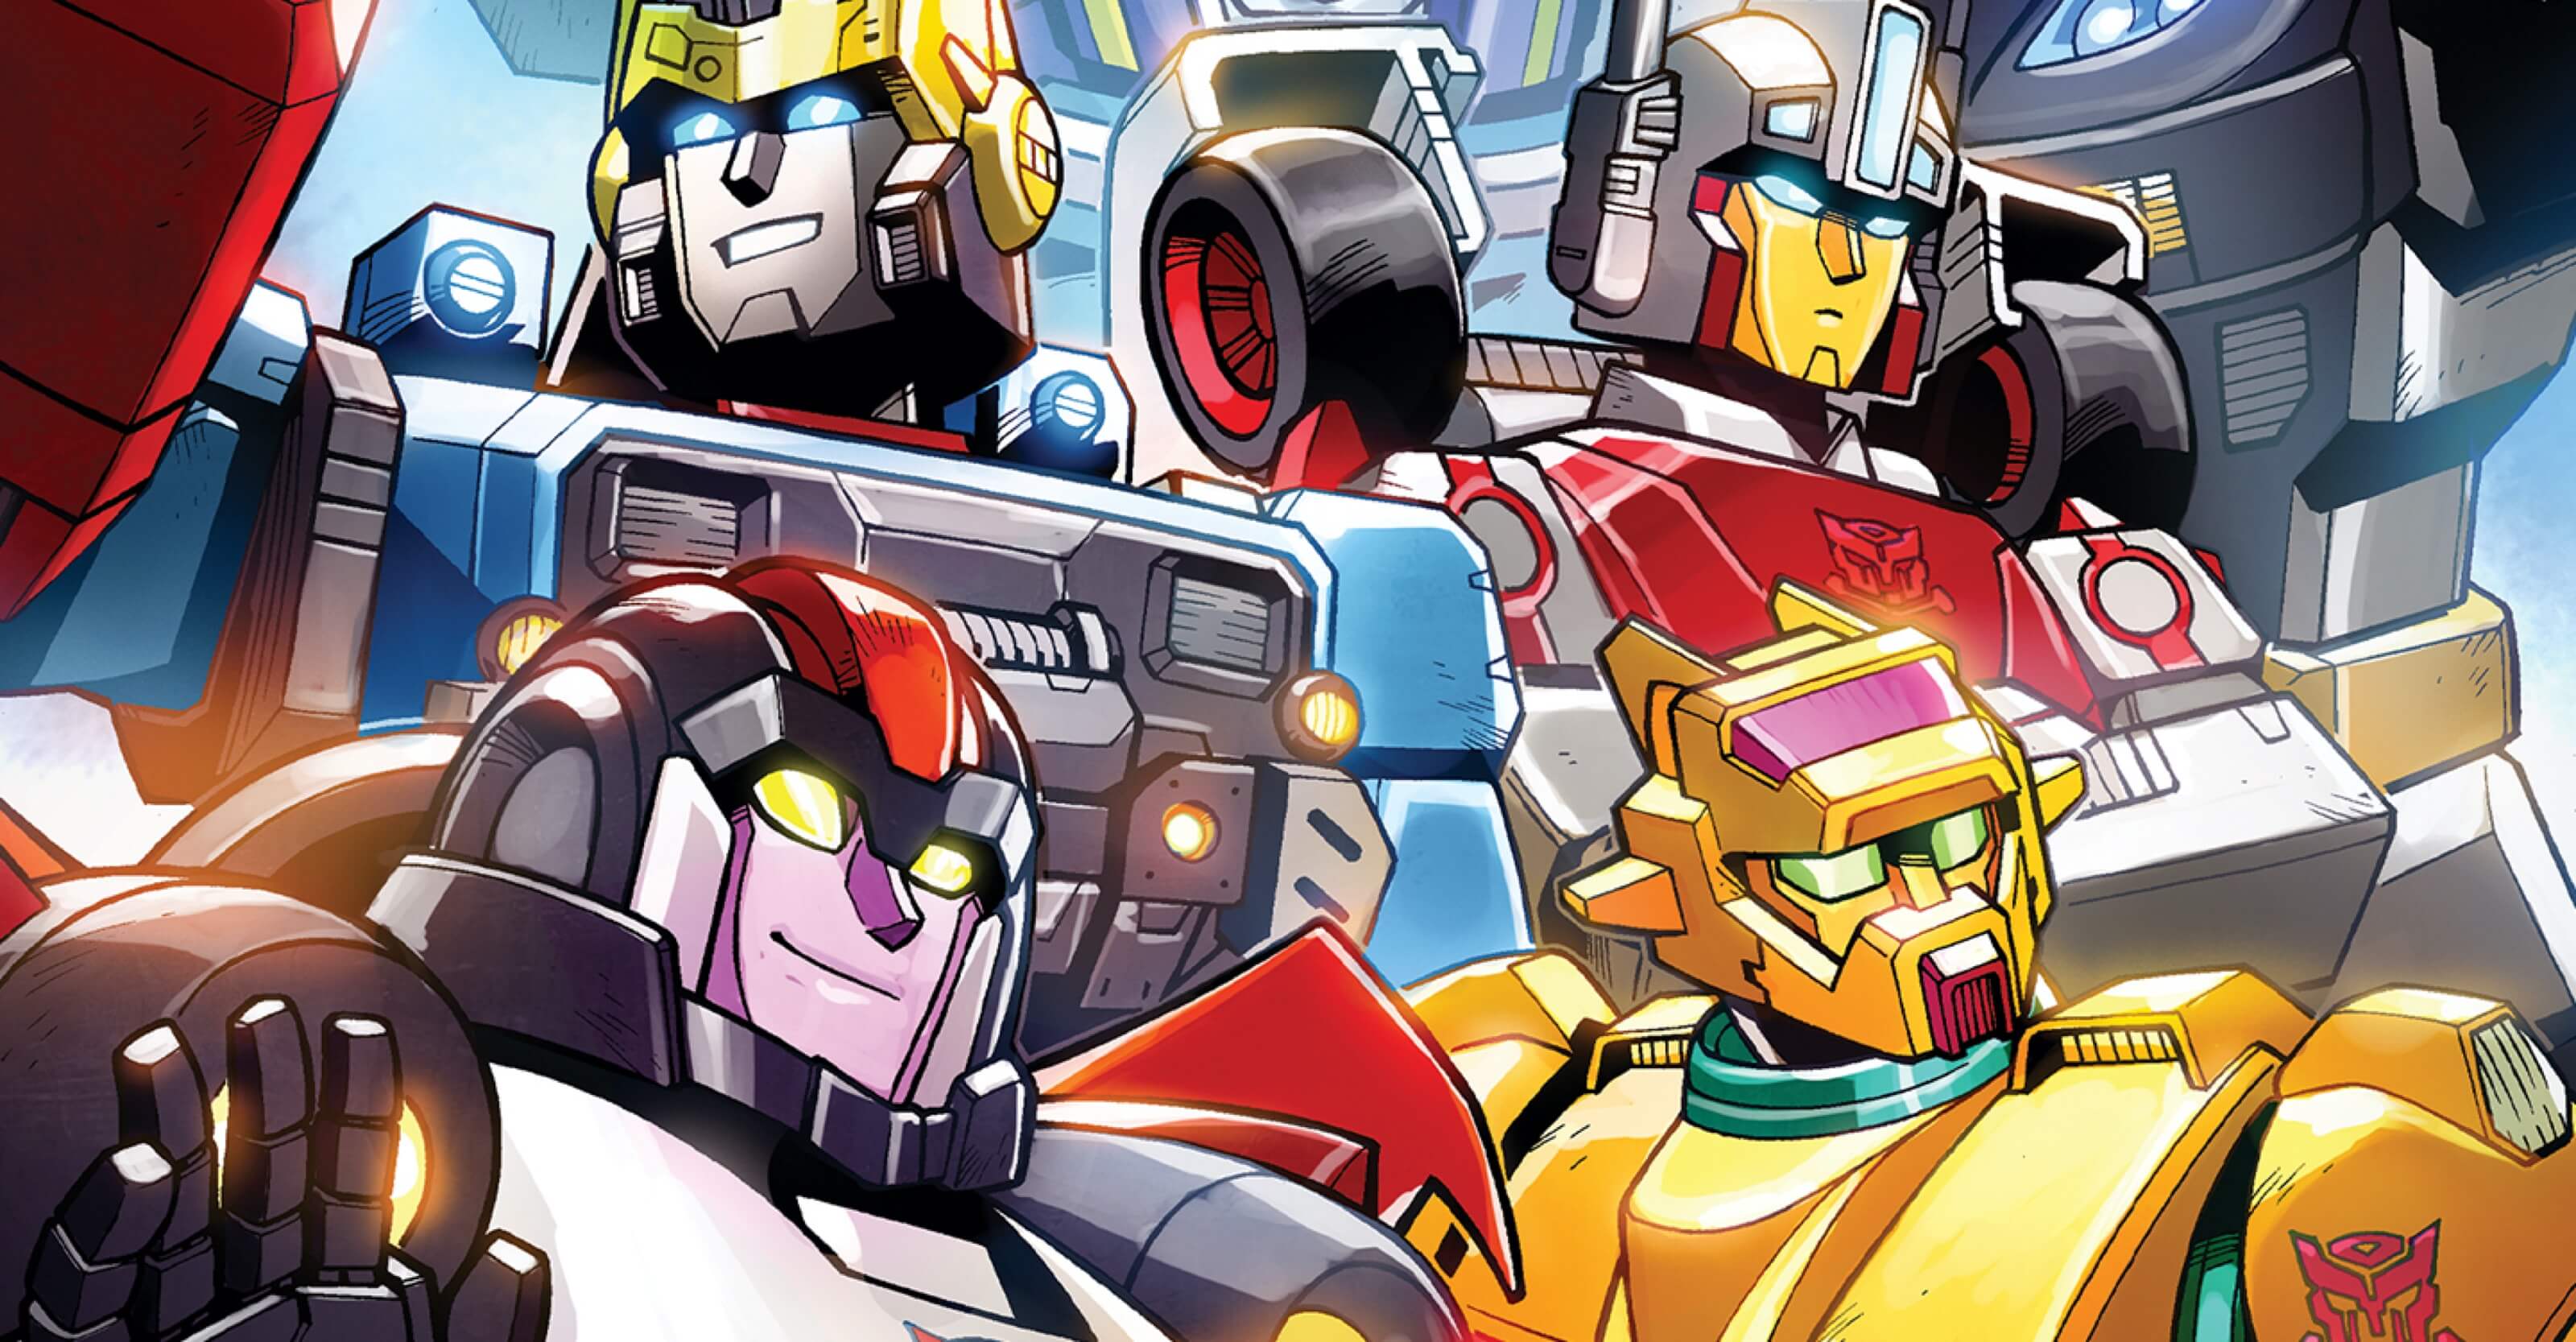 TRANSFORMERS: WRECKERS – TREAD & CIRCUITS Comic Book Series Coming in October from IDW